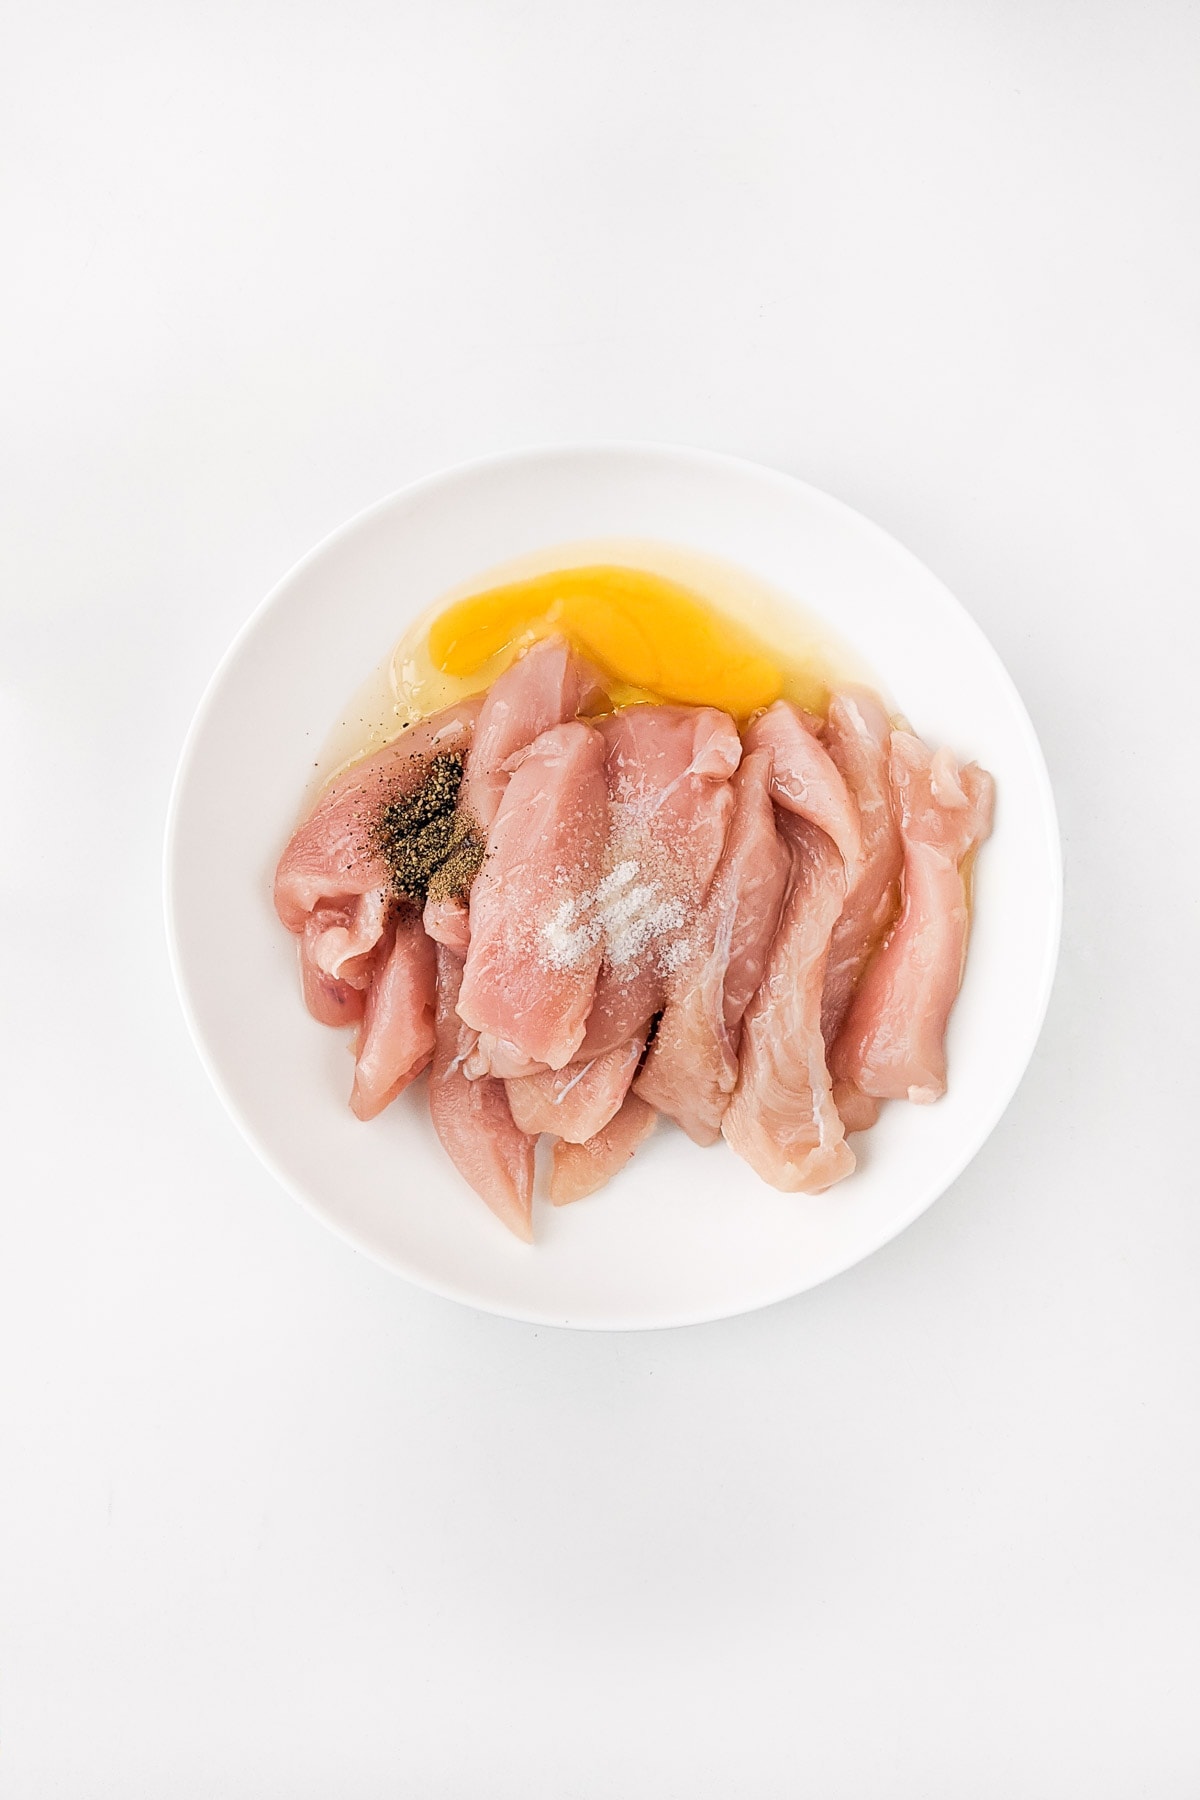 Raw chicken strips with salt, pepper, oil and raw egg.